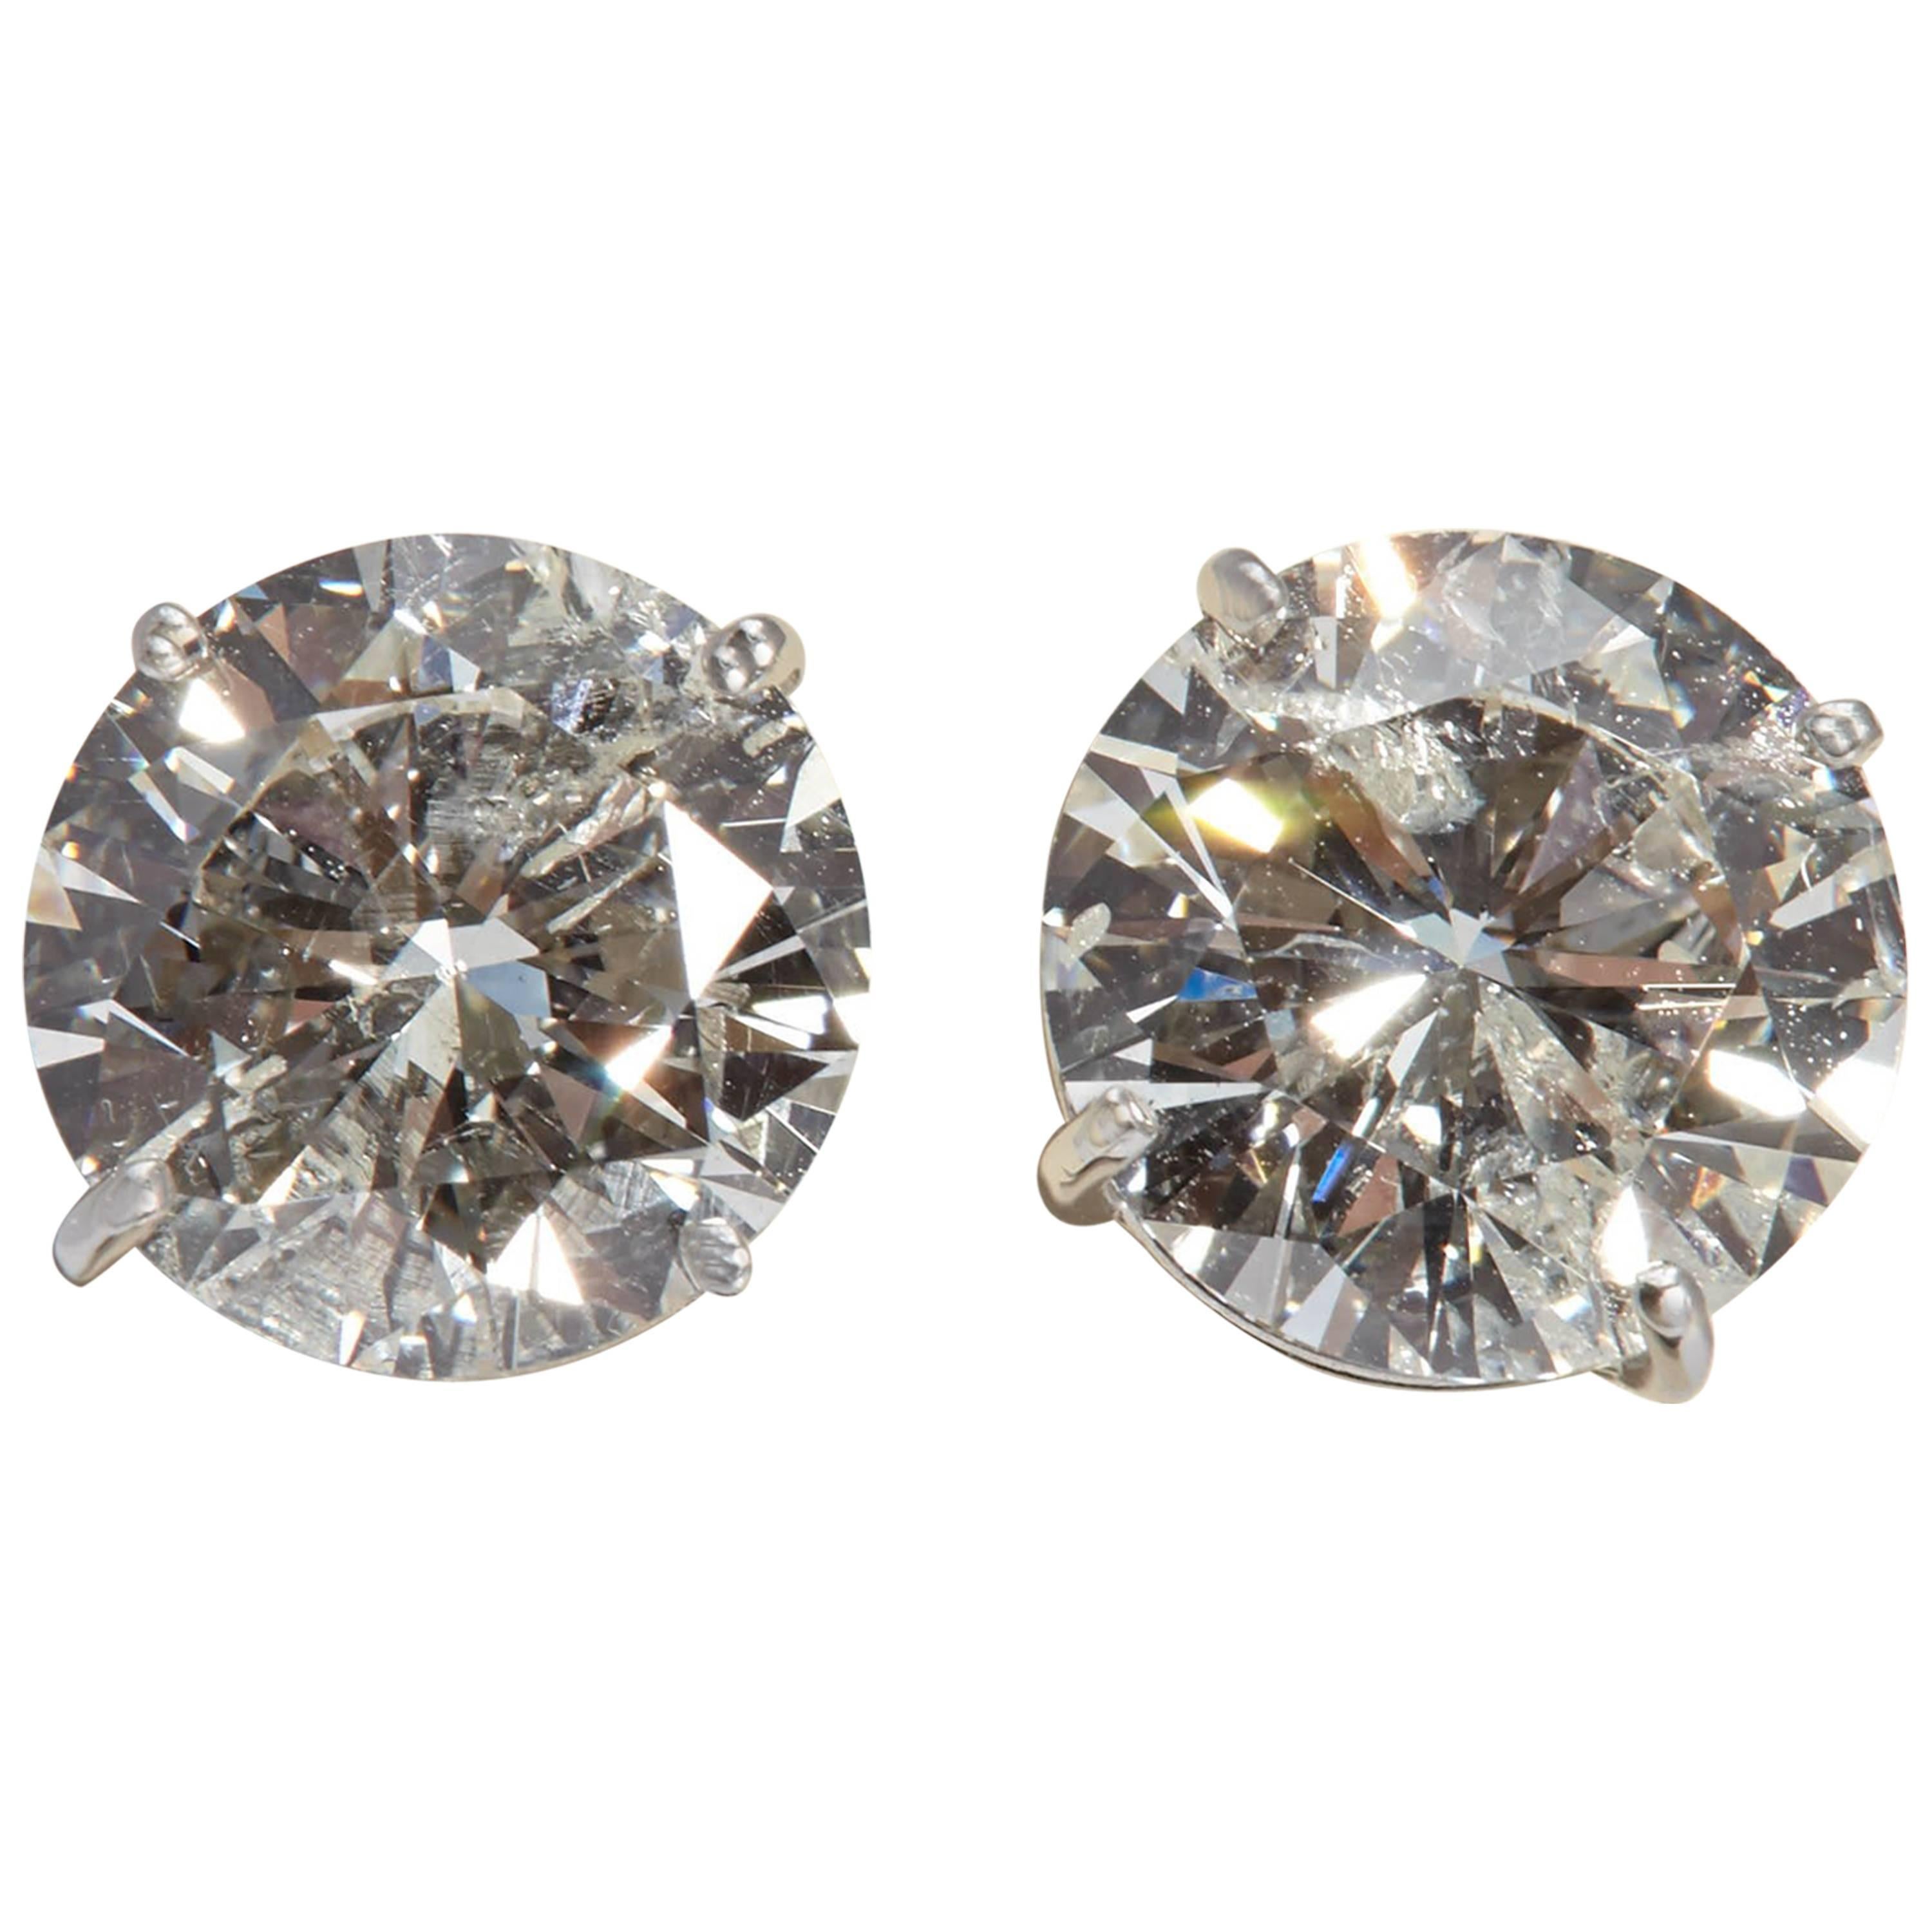 Large Round Diamond Earrings 7.01 Carat For Sale